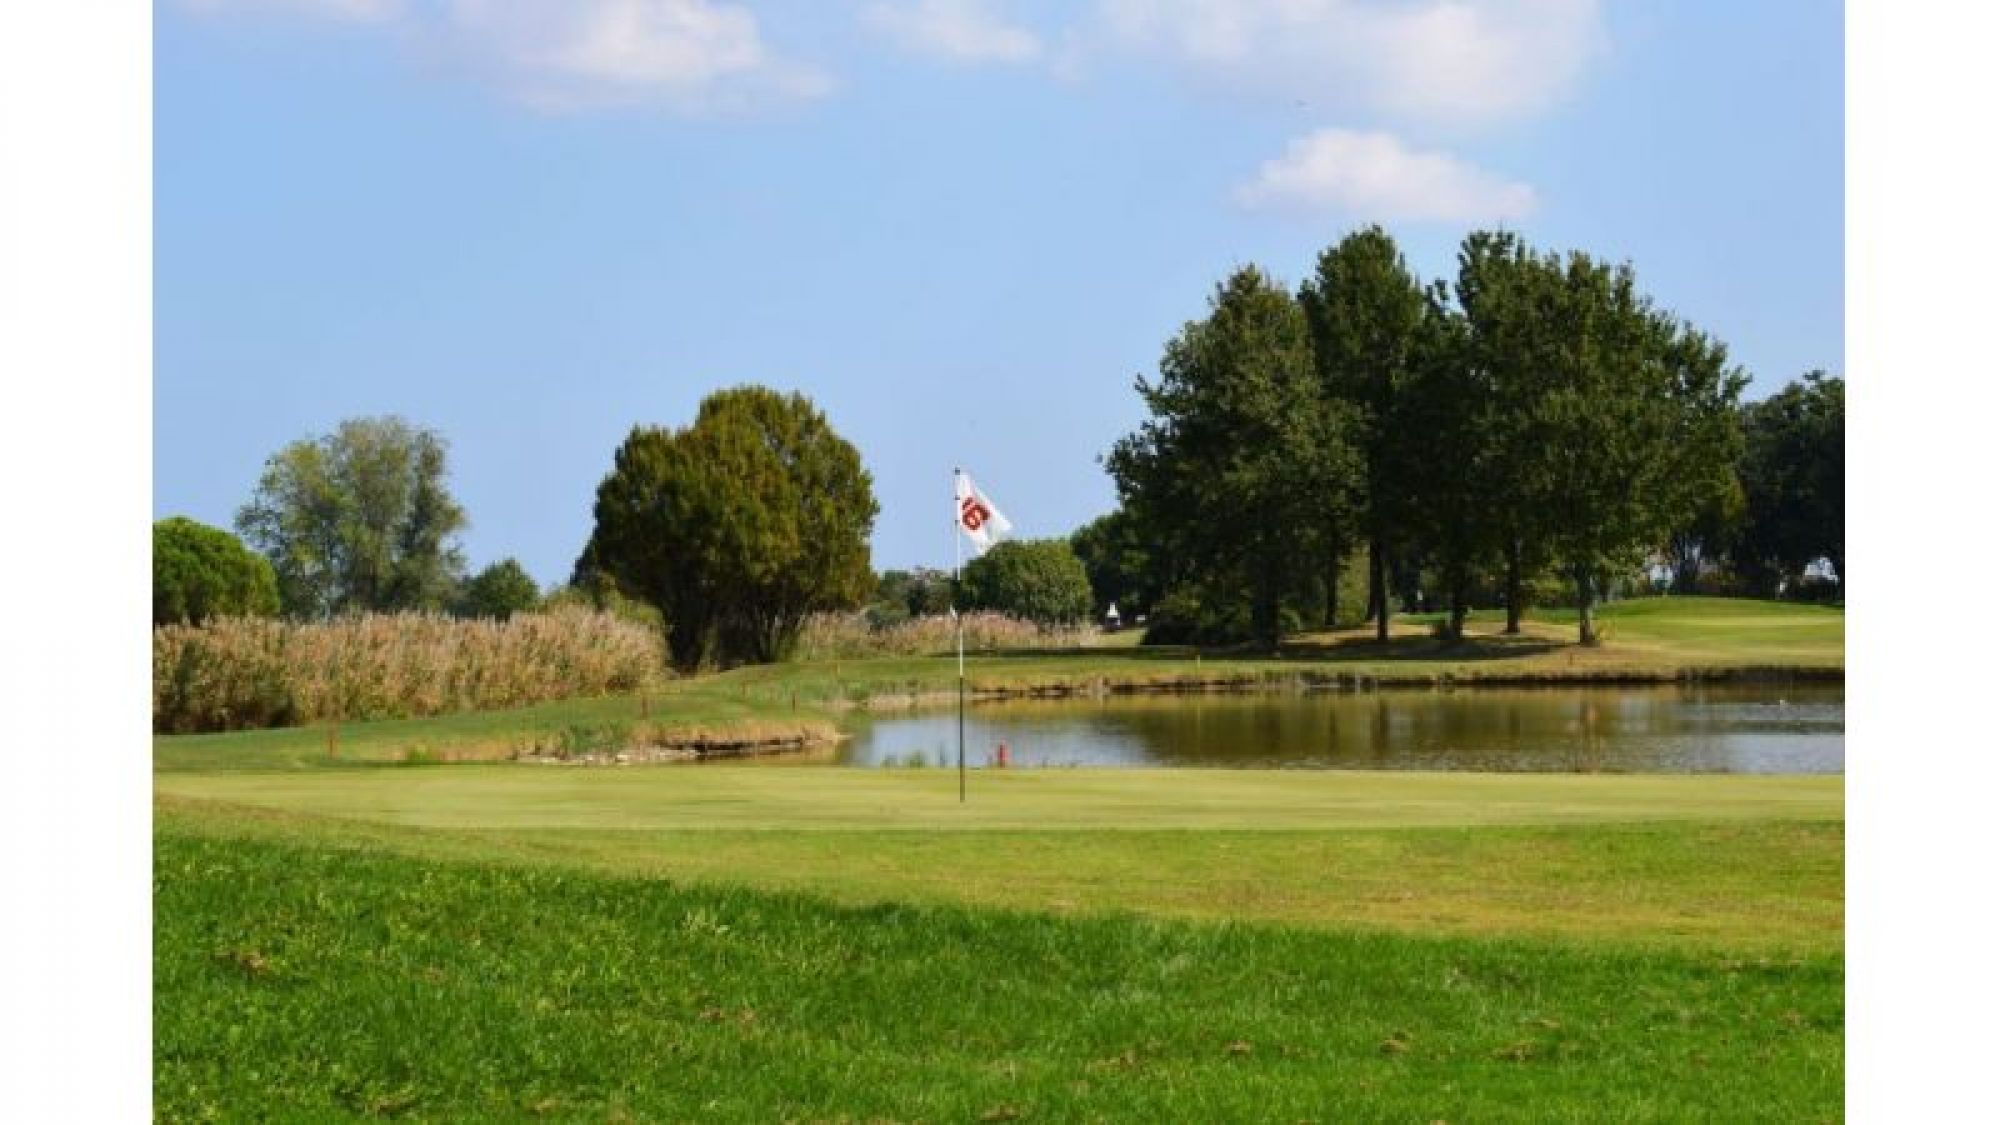 Rimini  Verucchio Golf Club has got lots of the leading golf course around Northern Italy